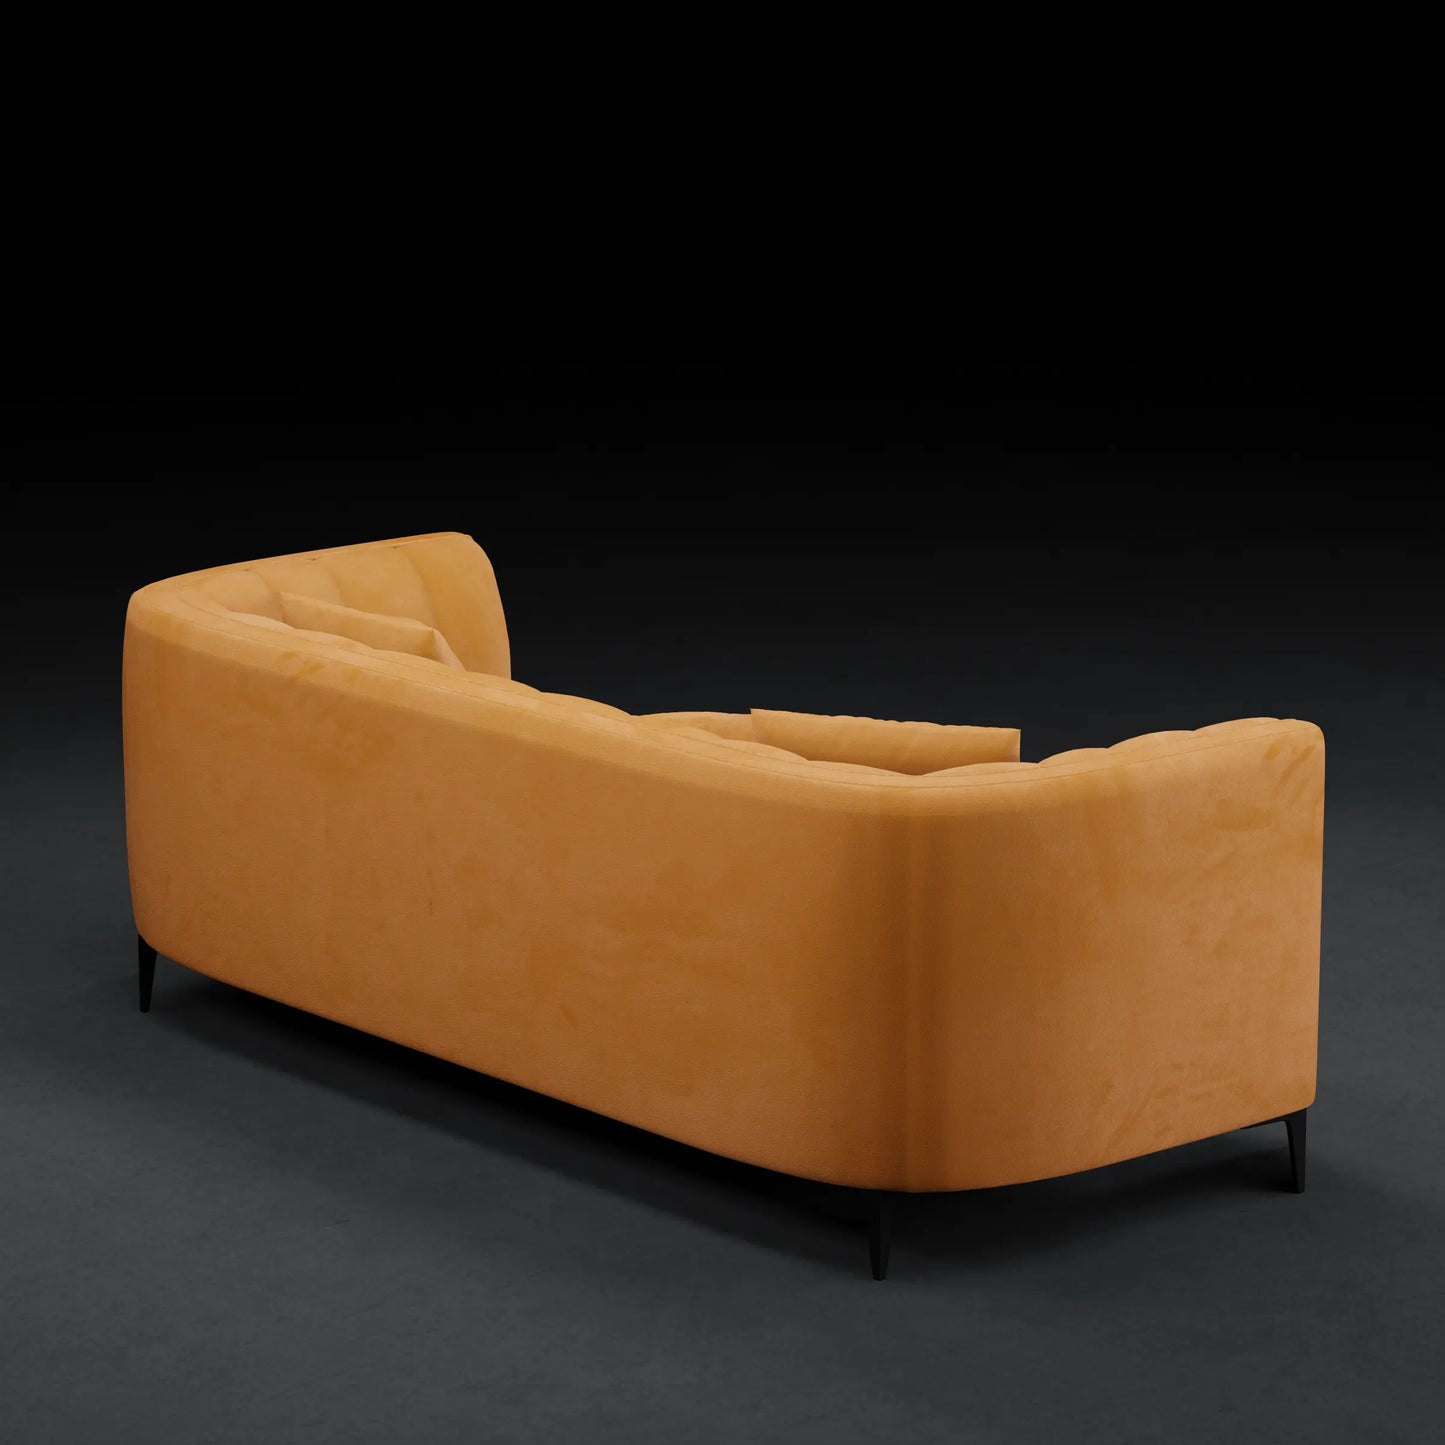 JASMINE - 2 Seater XL Couch in Velvet Finish | Ochre yellow Color